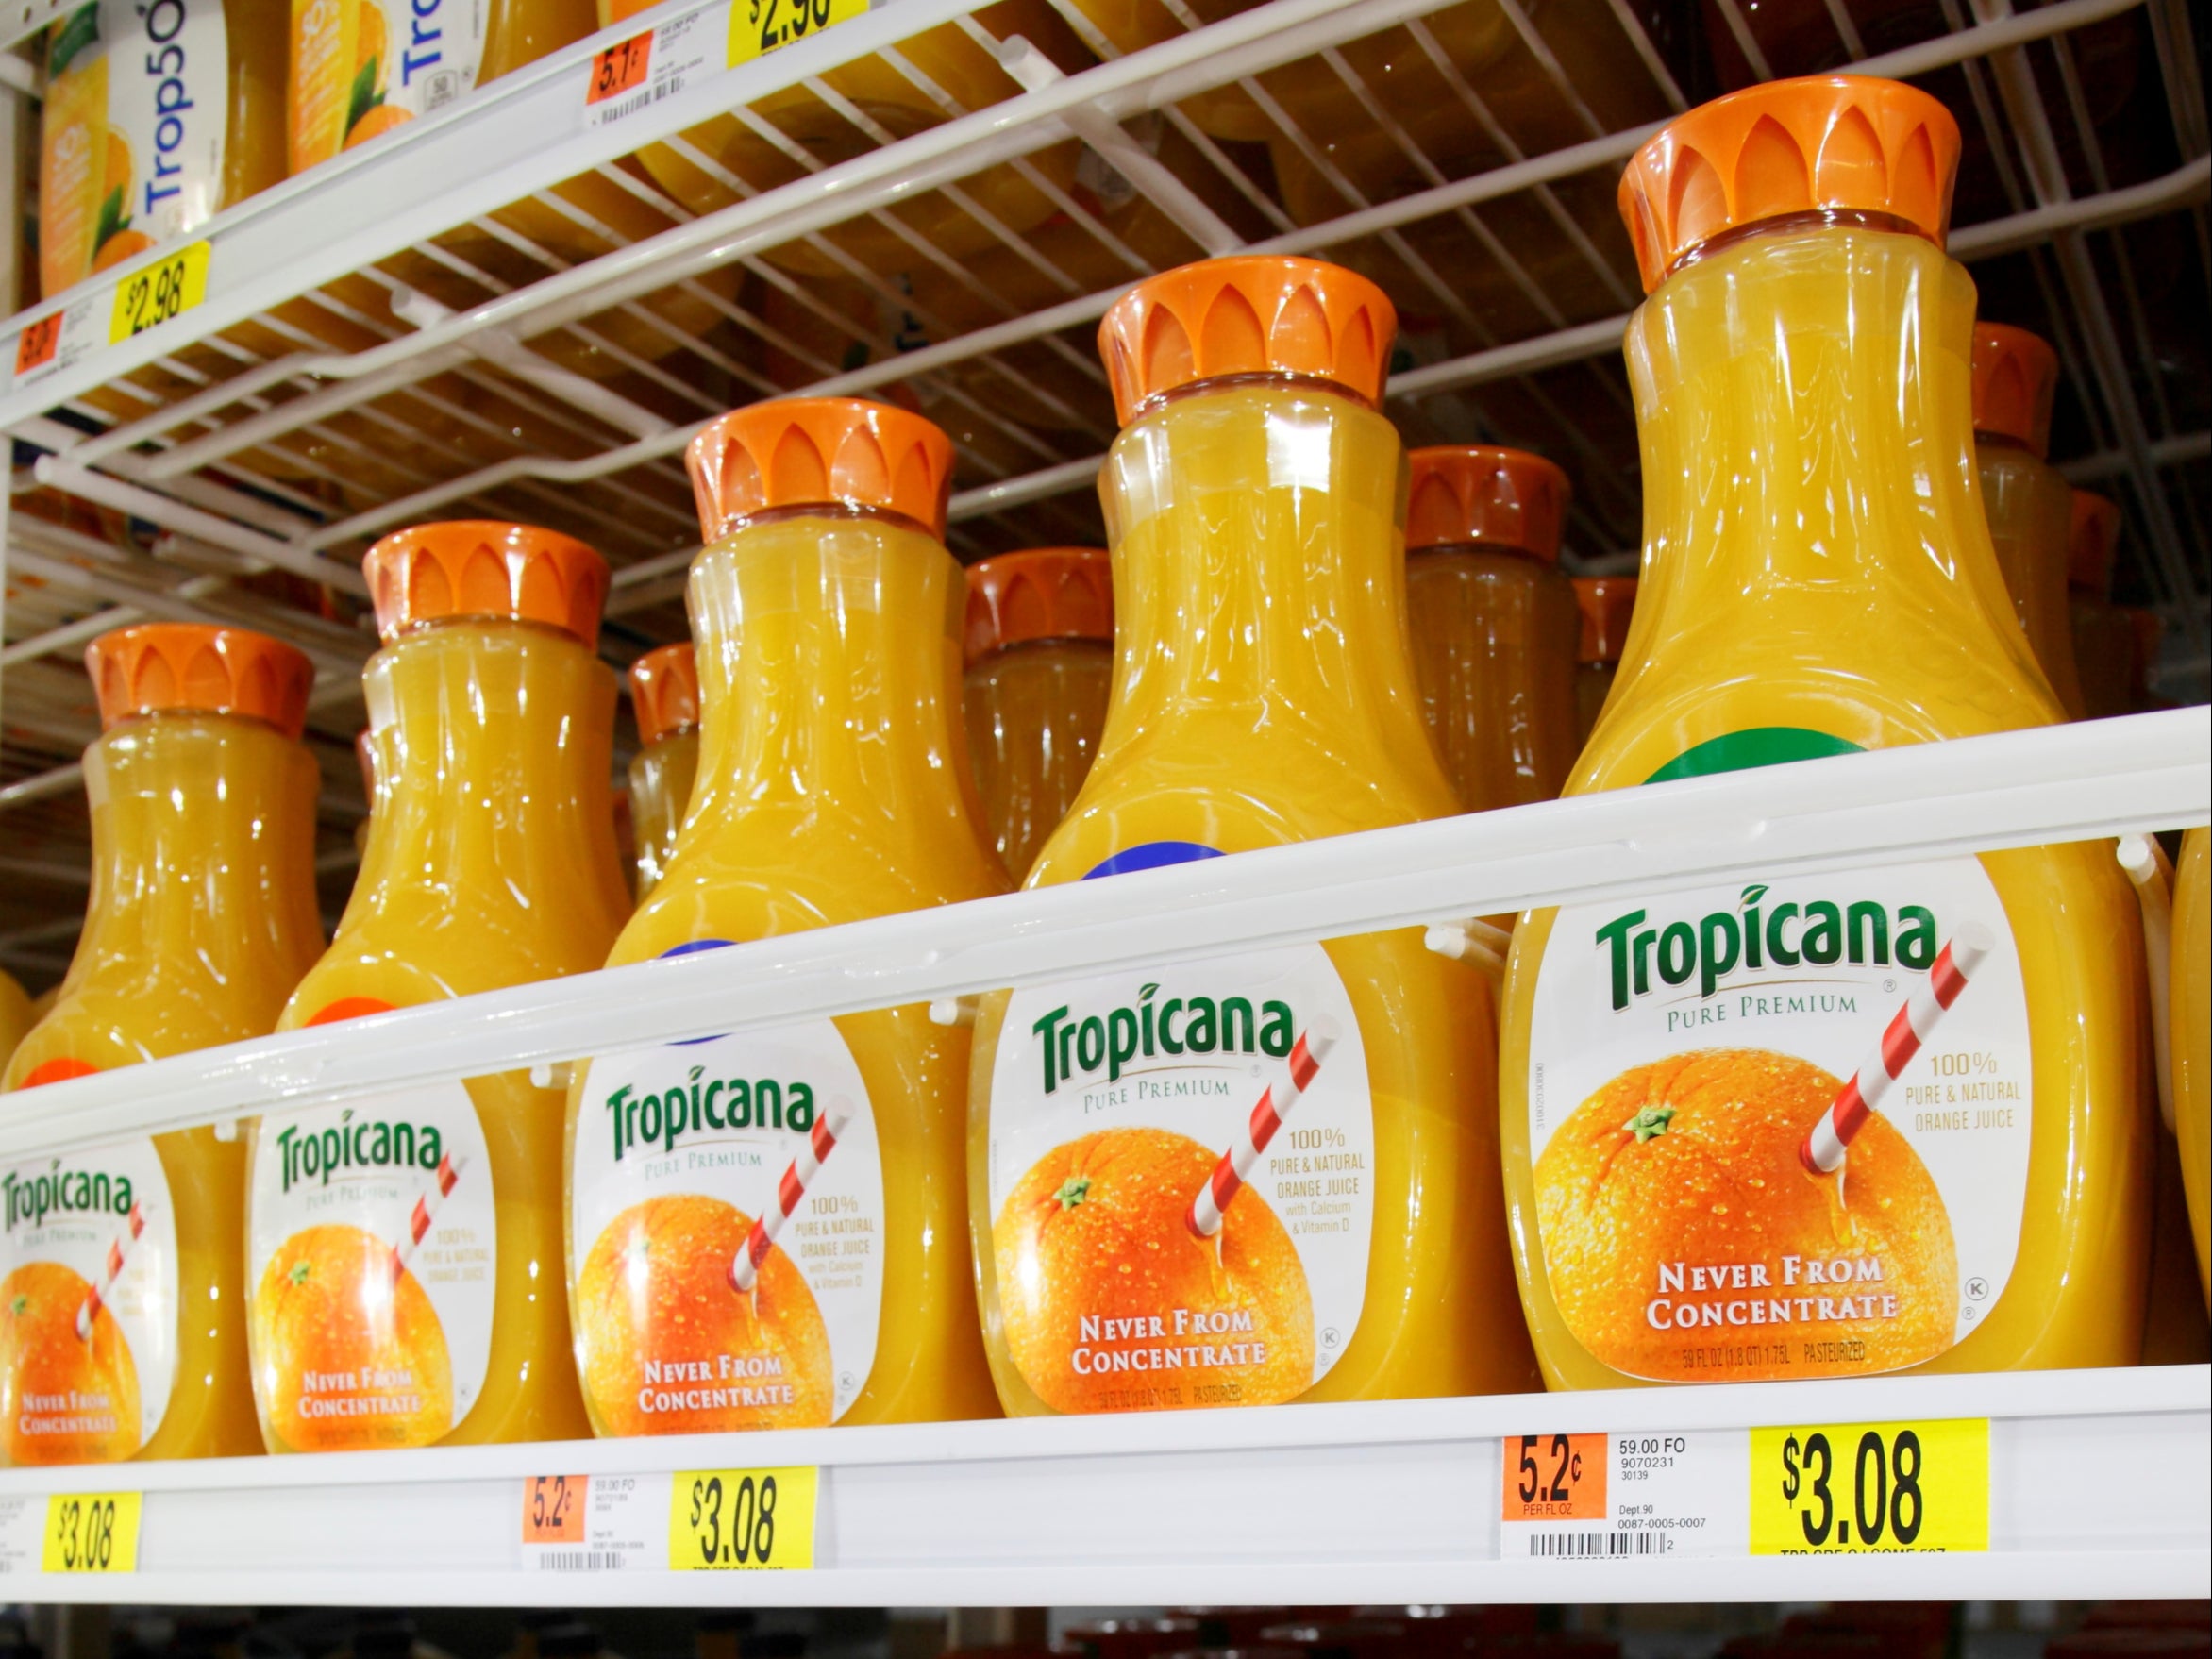 The juice businesses made about $3 billion in net revenue in 2020 for PepsiCo